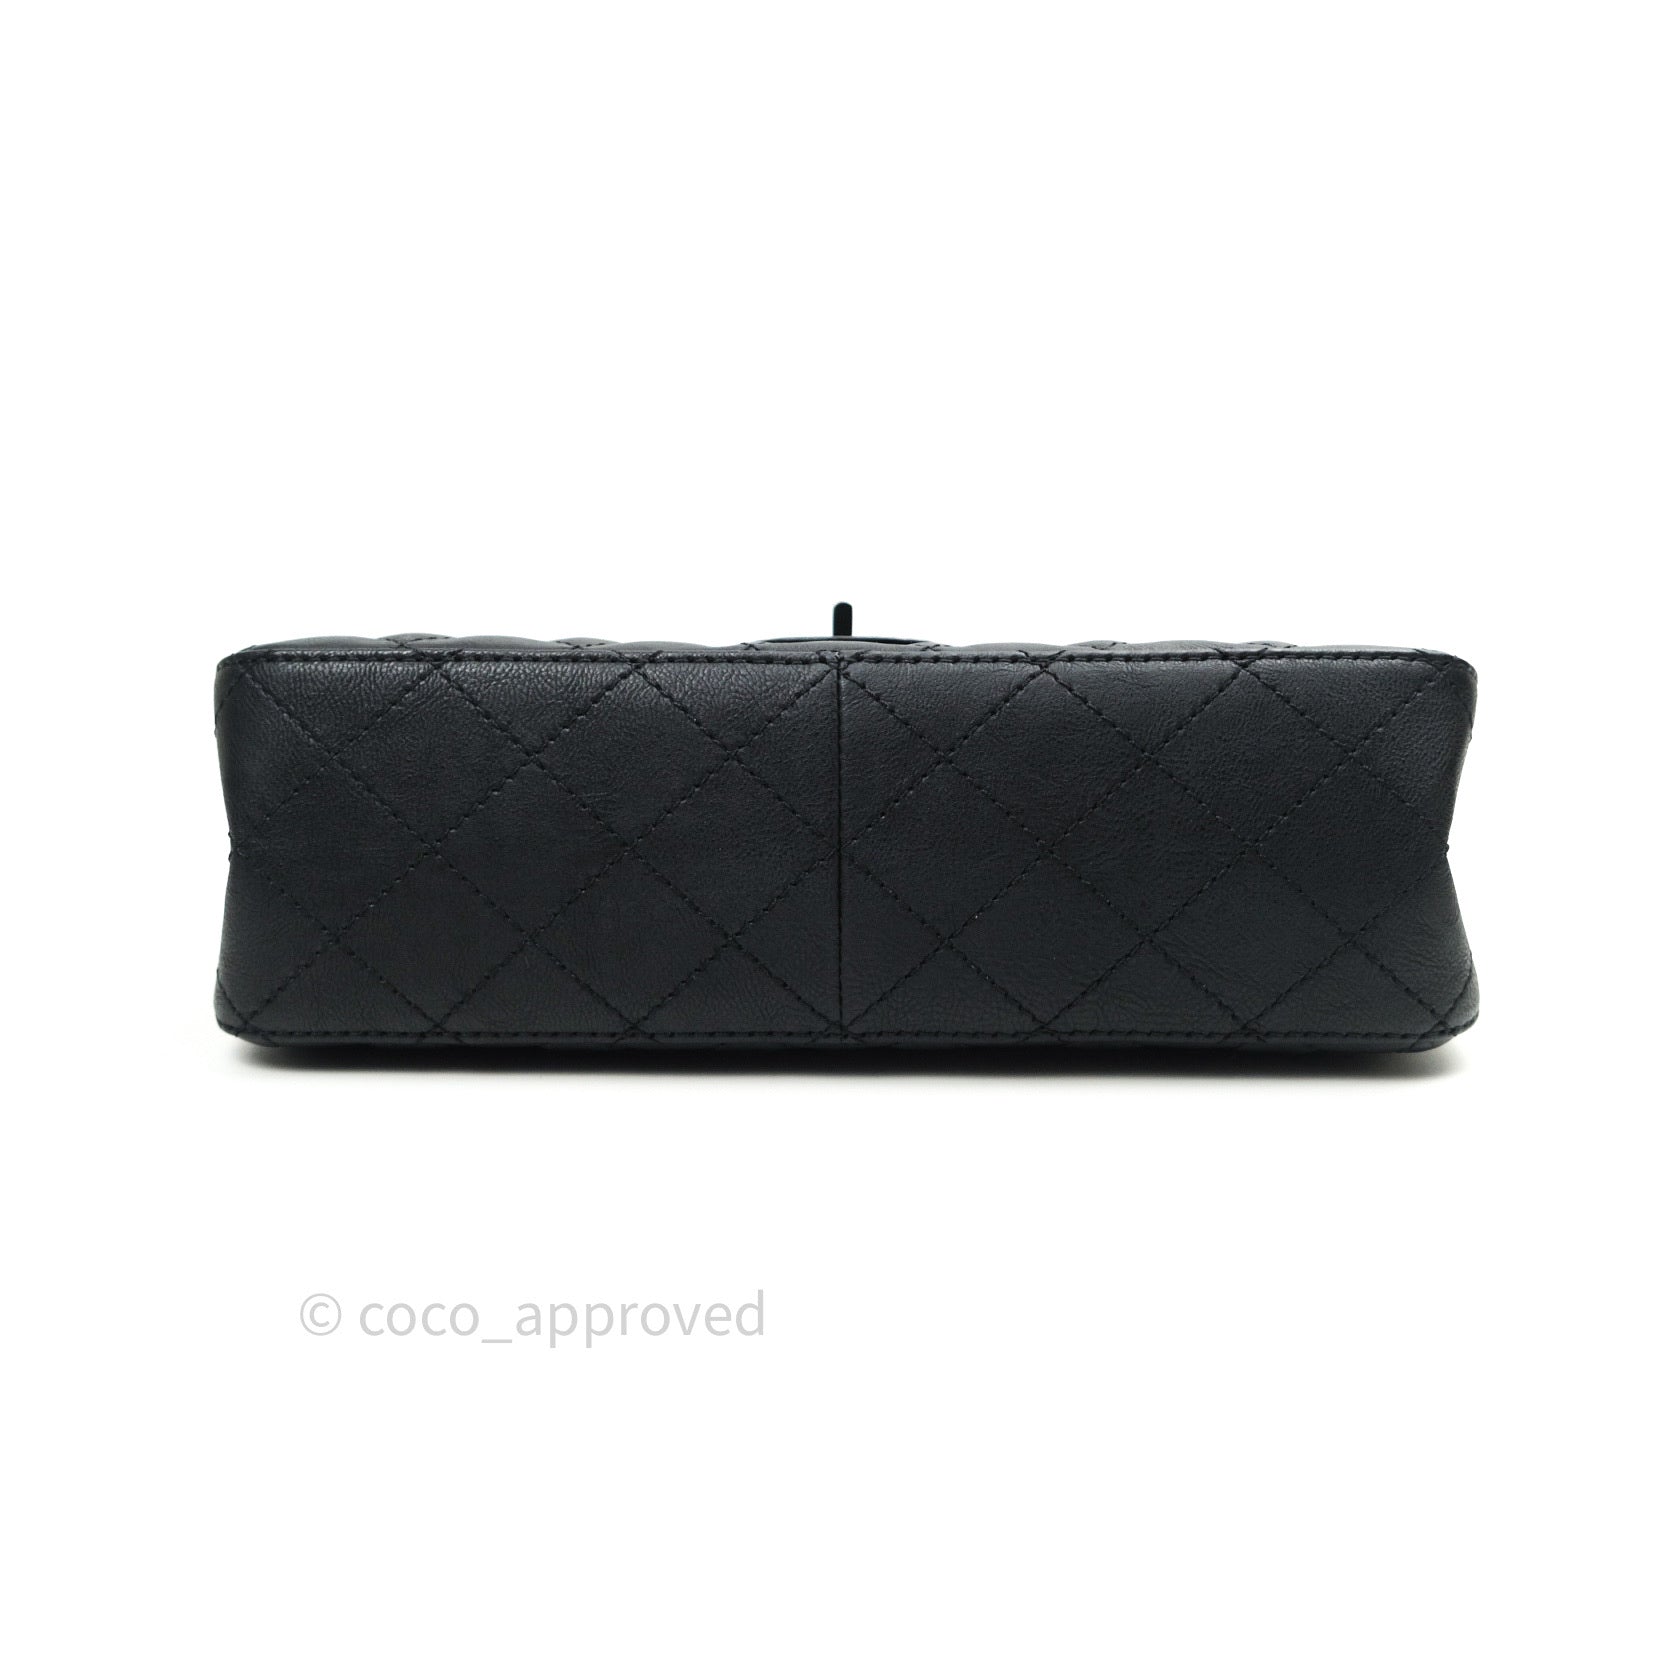 CHANEL Caviar Quilted 2.55 Reissue 226 Flap Black 1293721